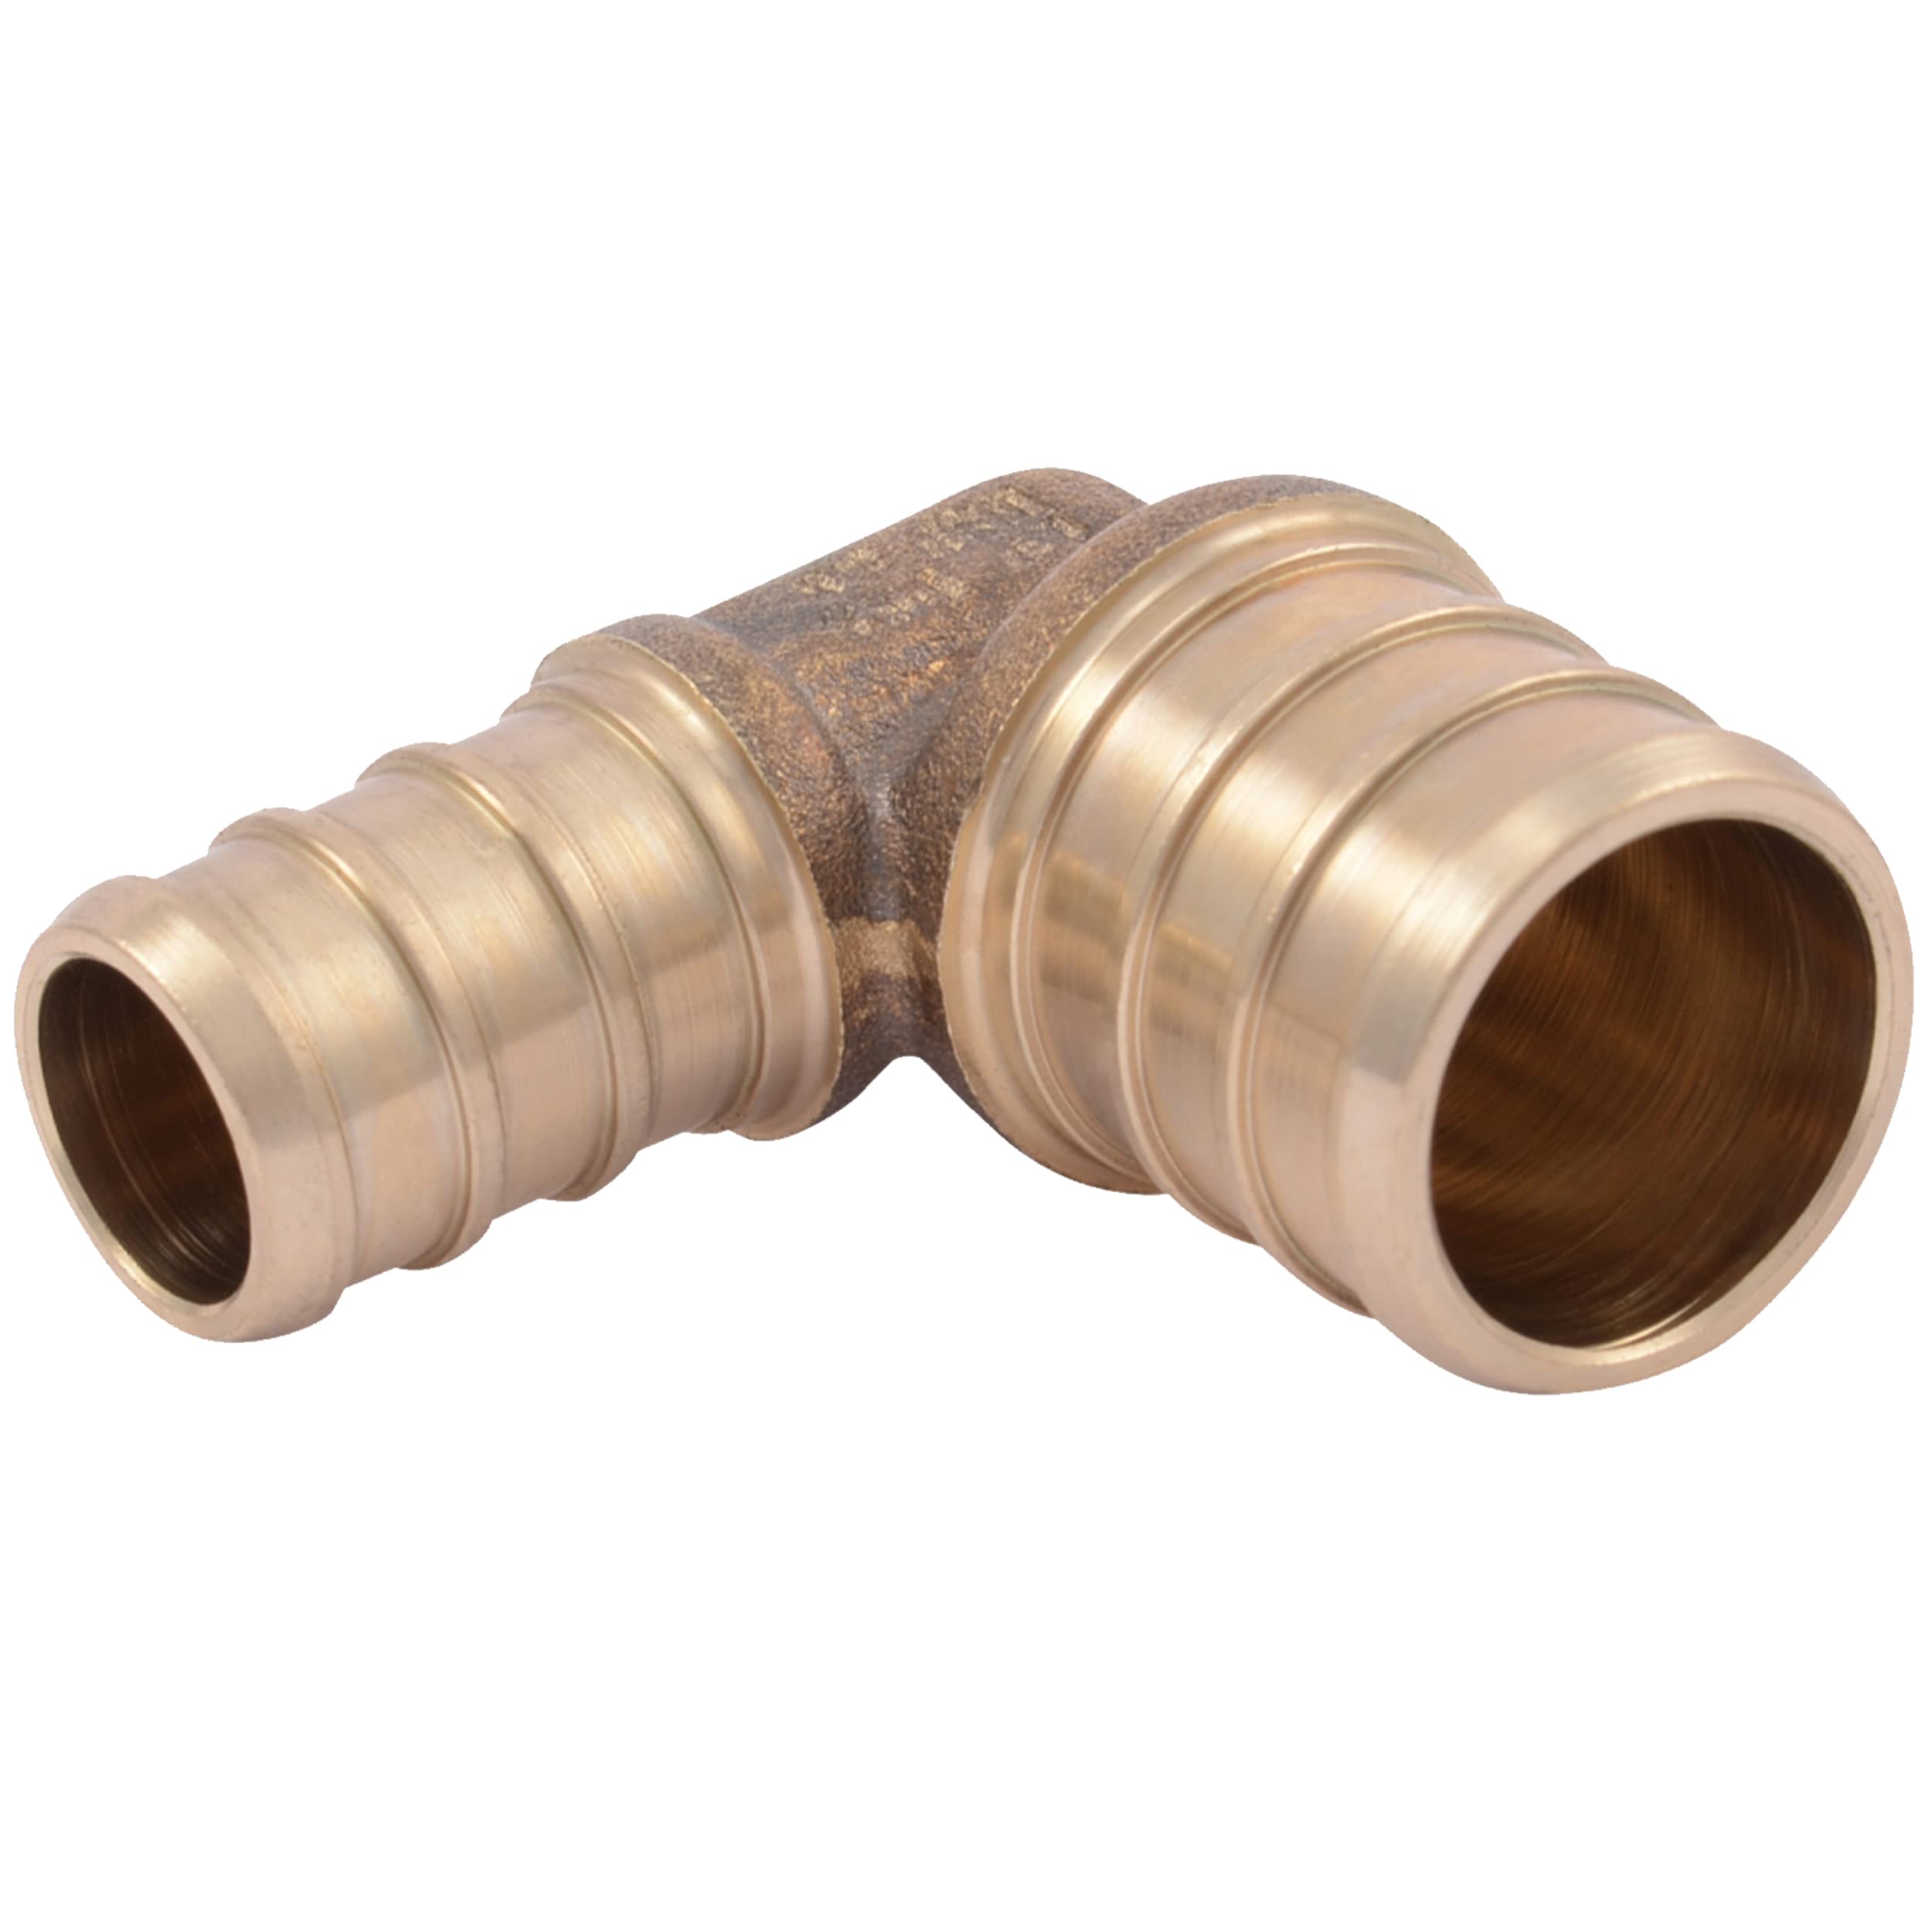 SharkBite 3/4" x 1/2" PEX Barb Brass 90-Degree Reducing Elbow Fitting $2.97 + Free Shipping w/ Prime or on $35+